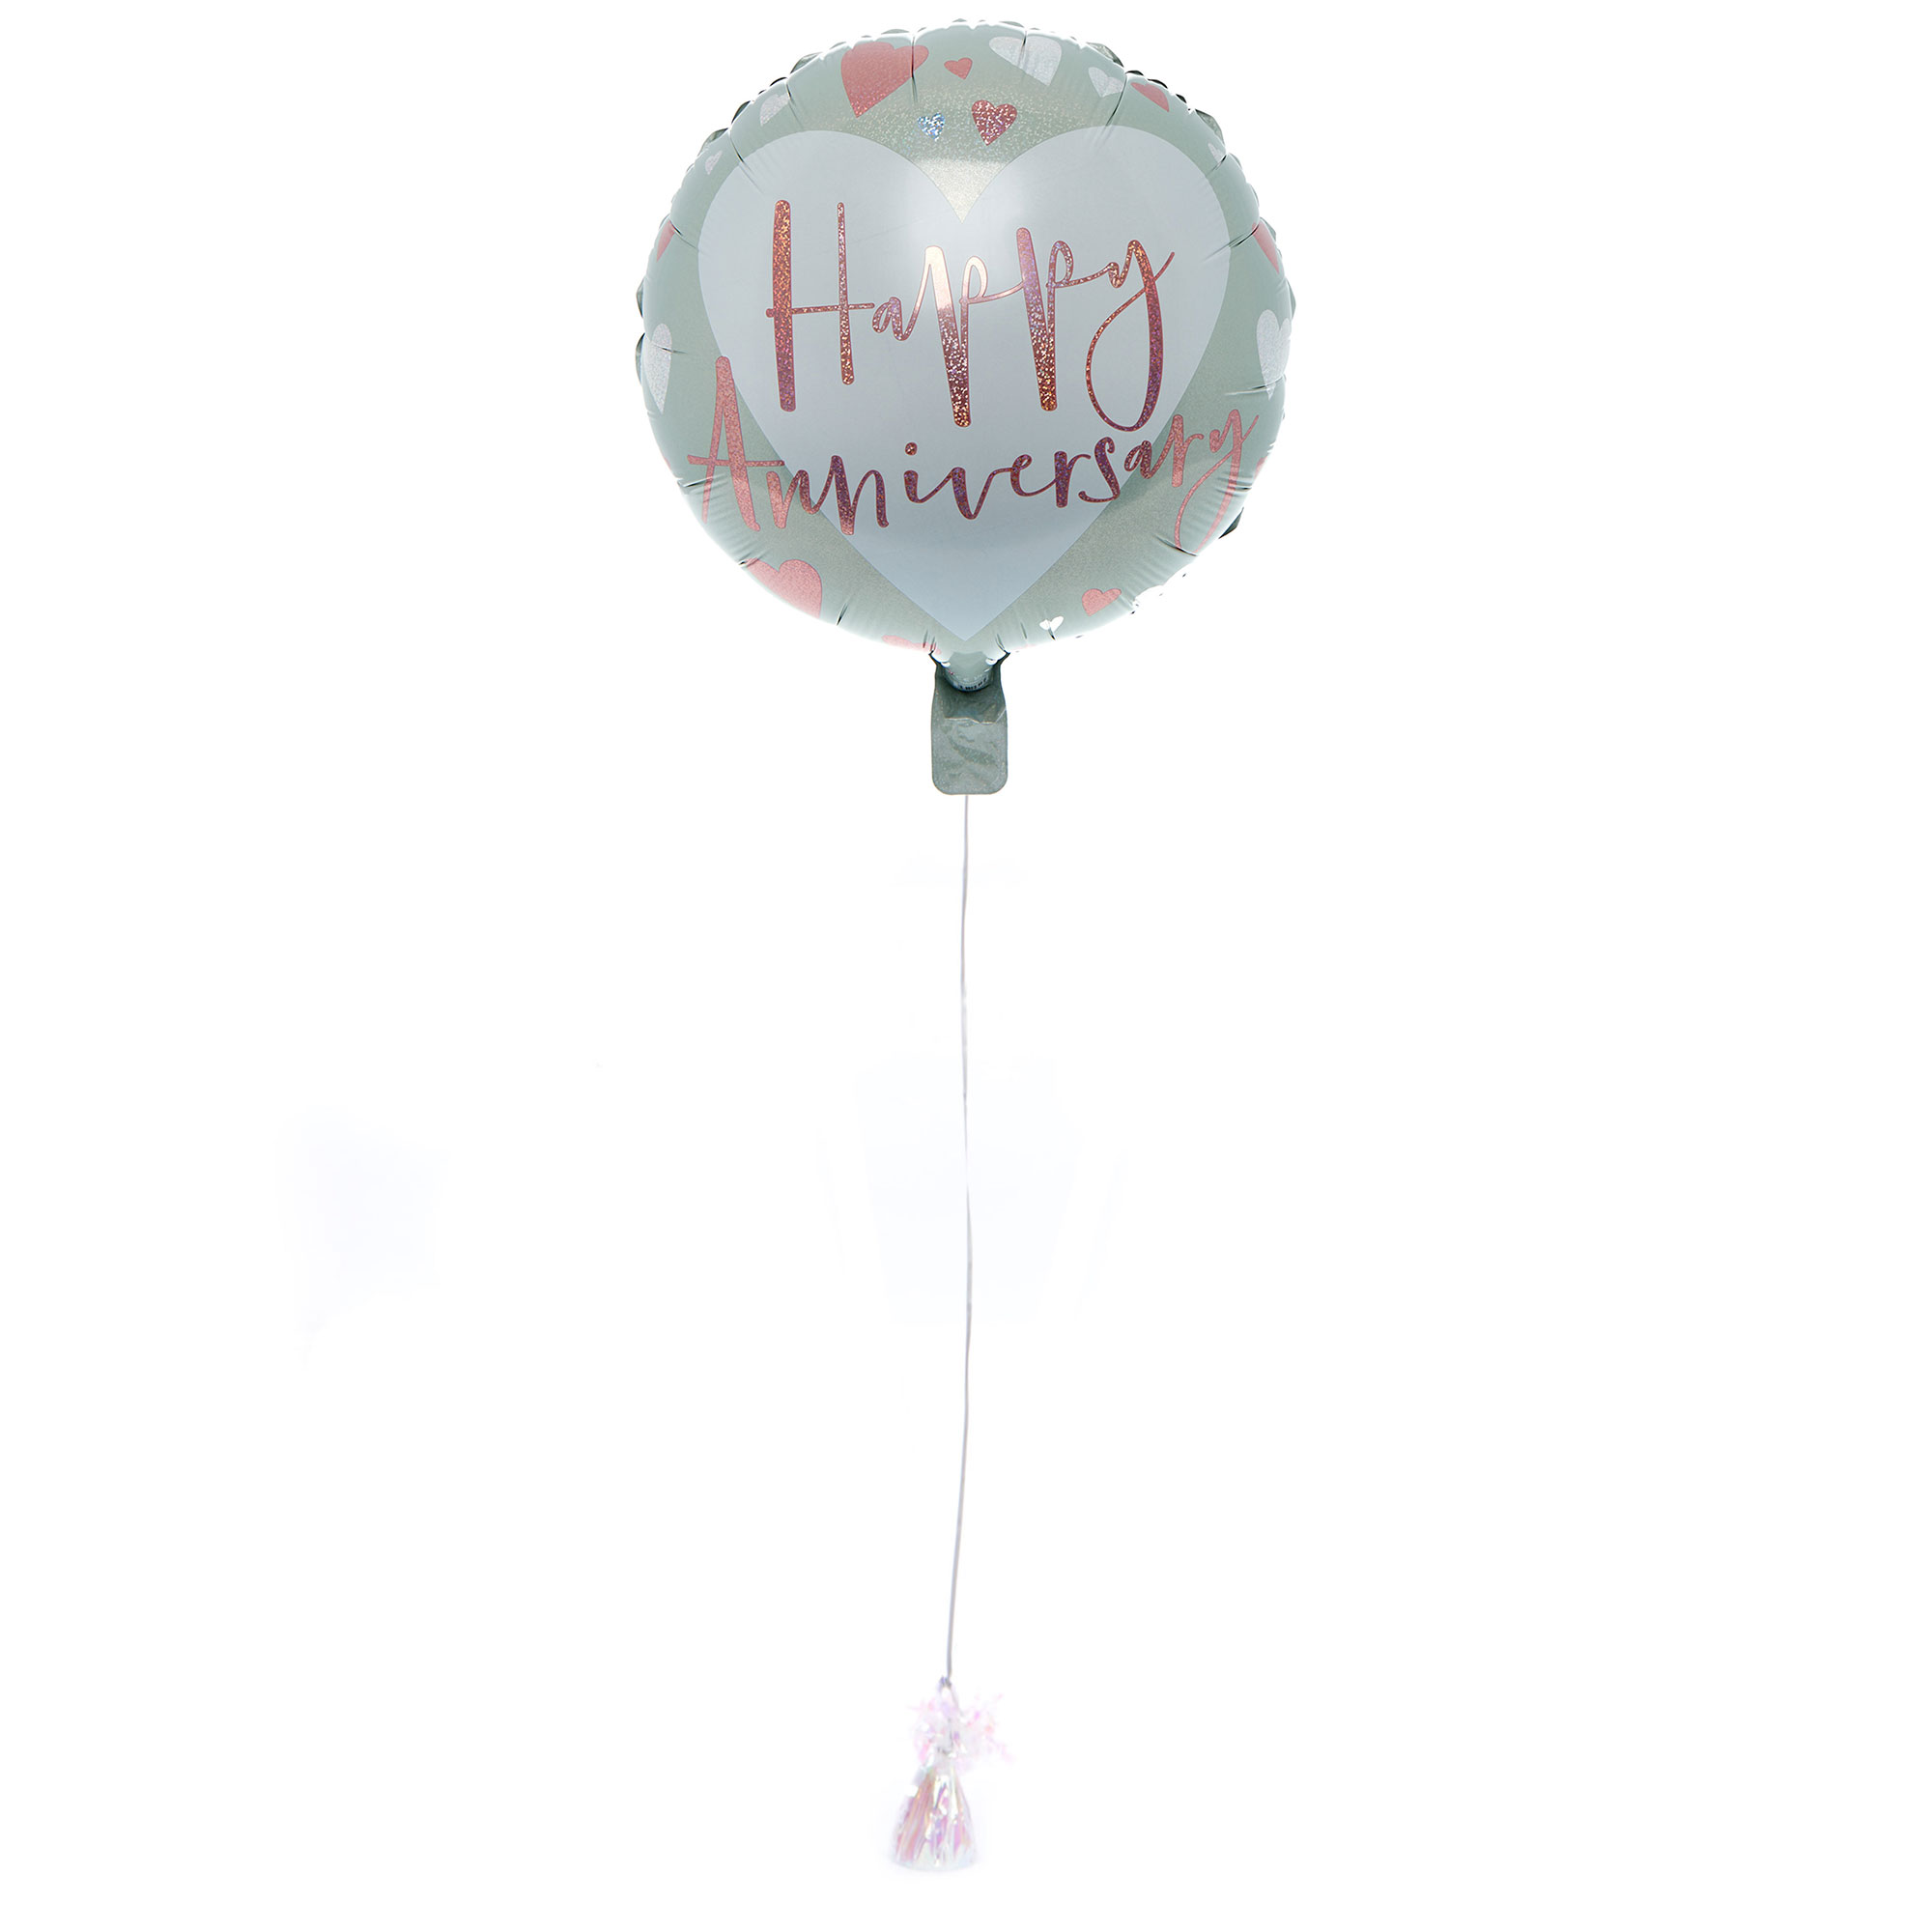 Happy Anniversary Balloon & Lindt Chocolate Box - FREE GIFT CARD!